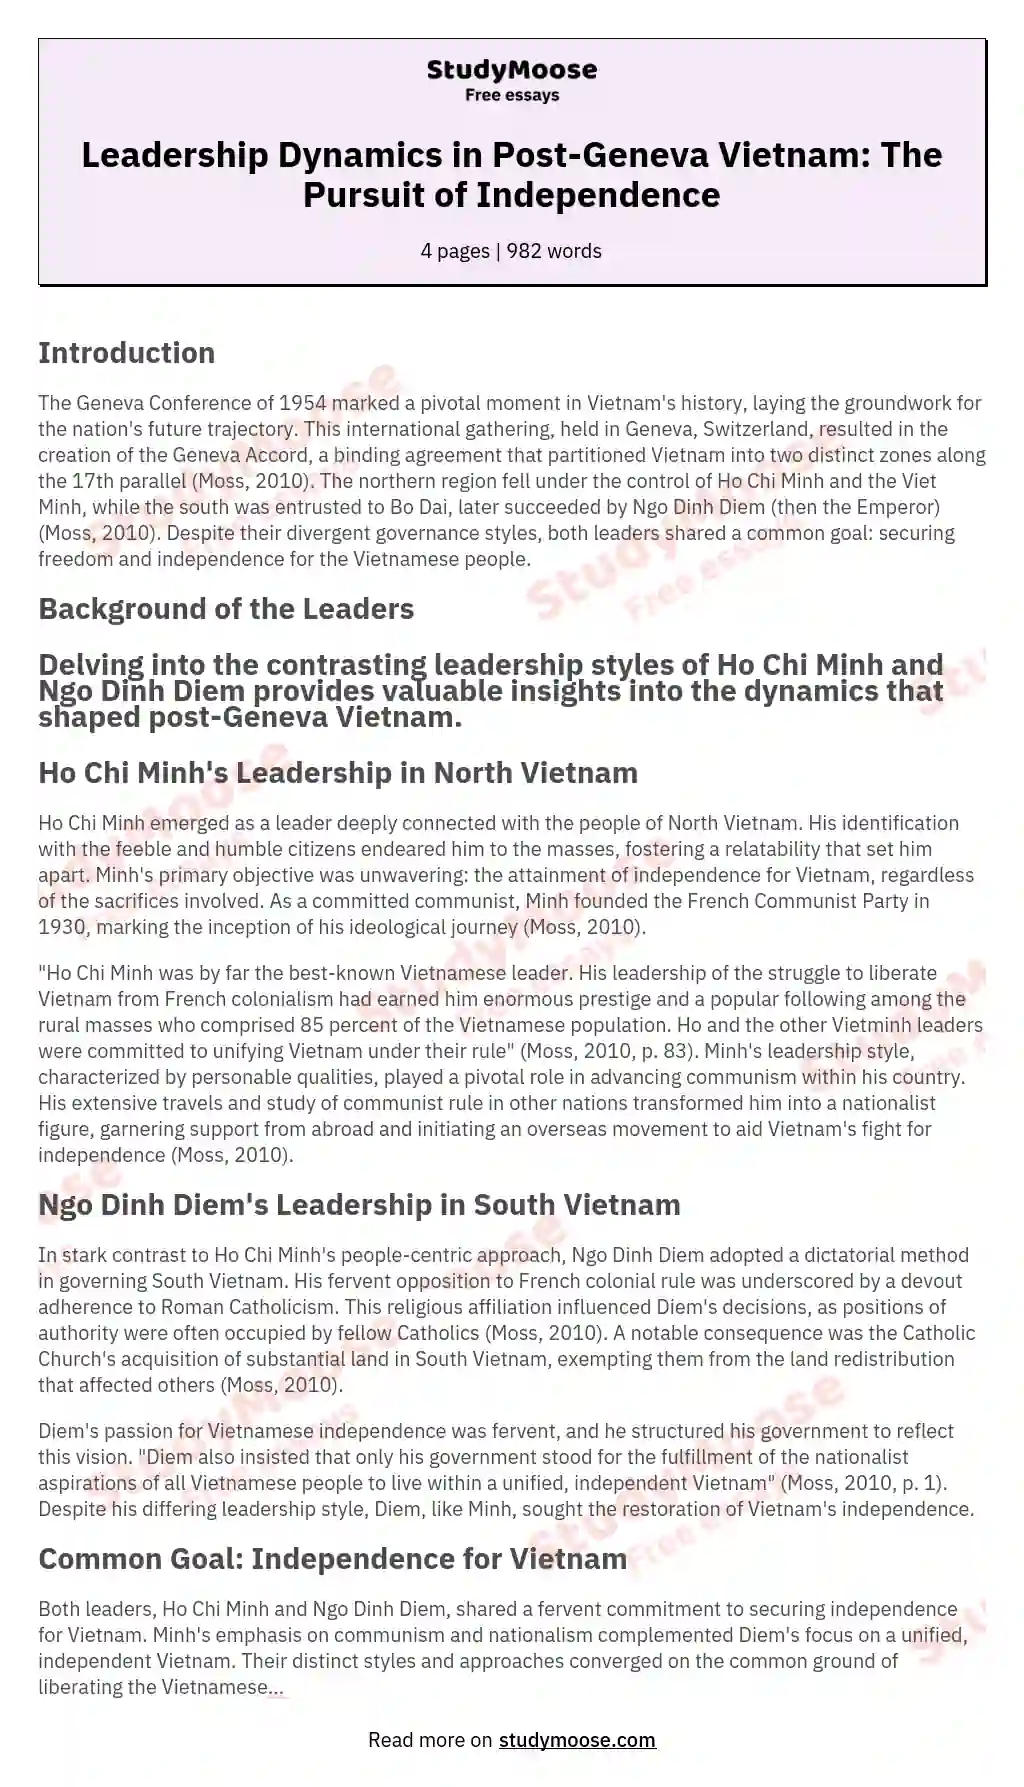 Leadership Dynamics in Post-Geneva Vietnam: The Pursuit of Independence essay